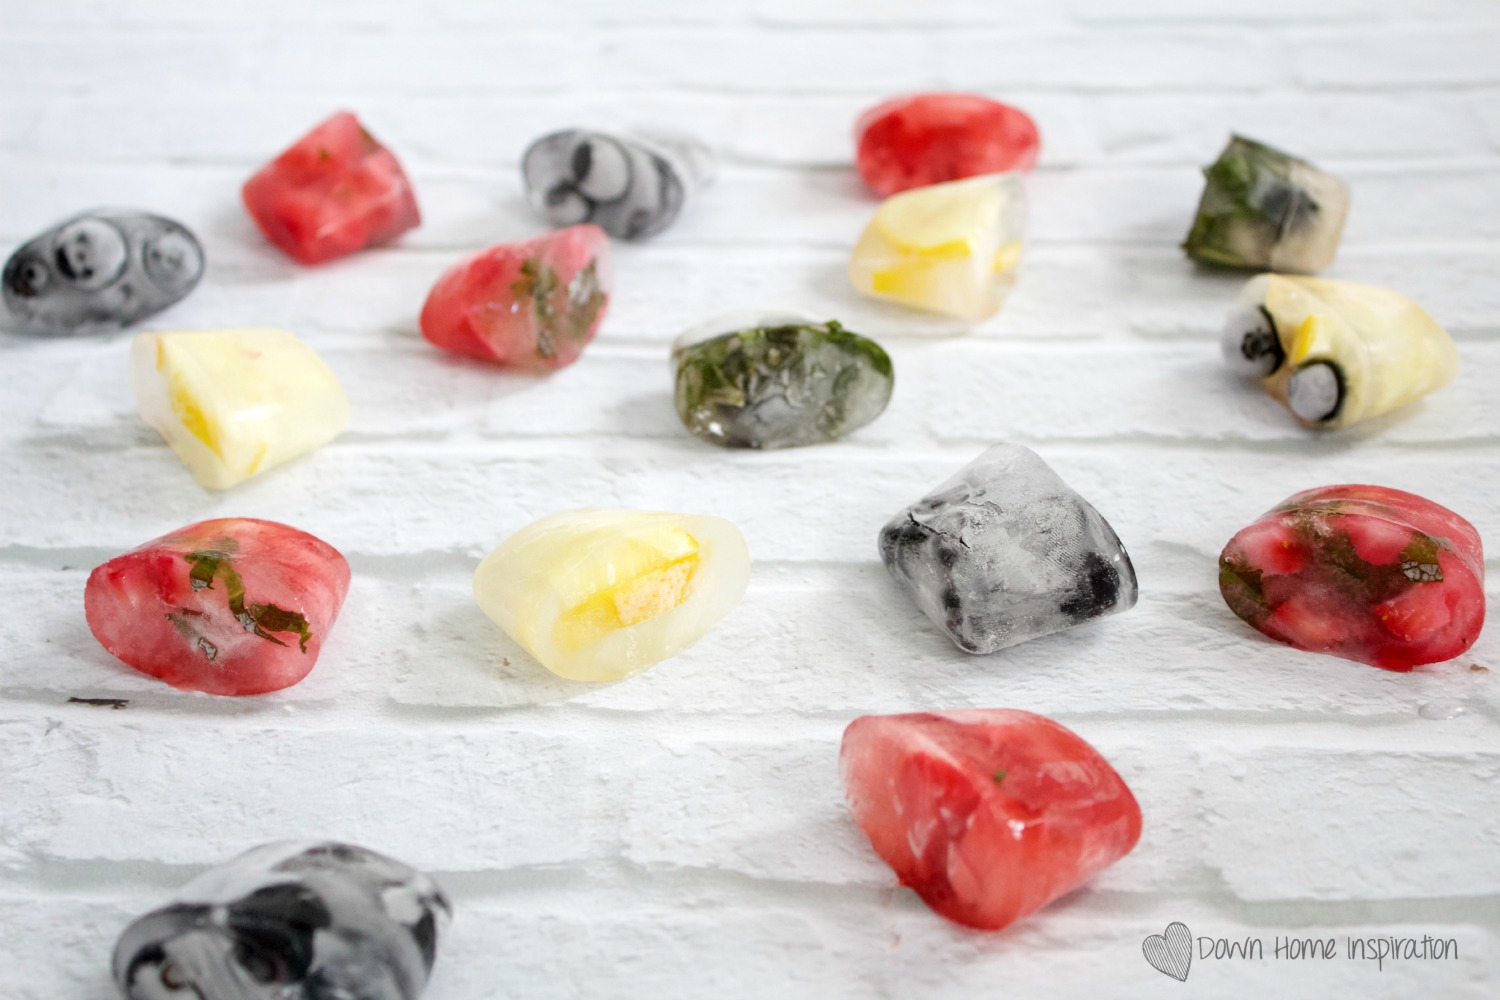 flavored-ice-cubes-8